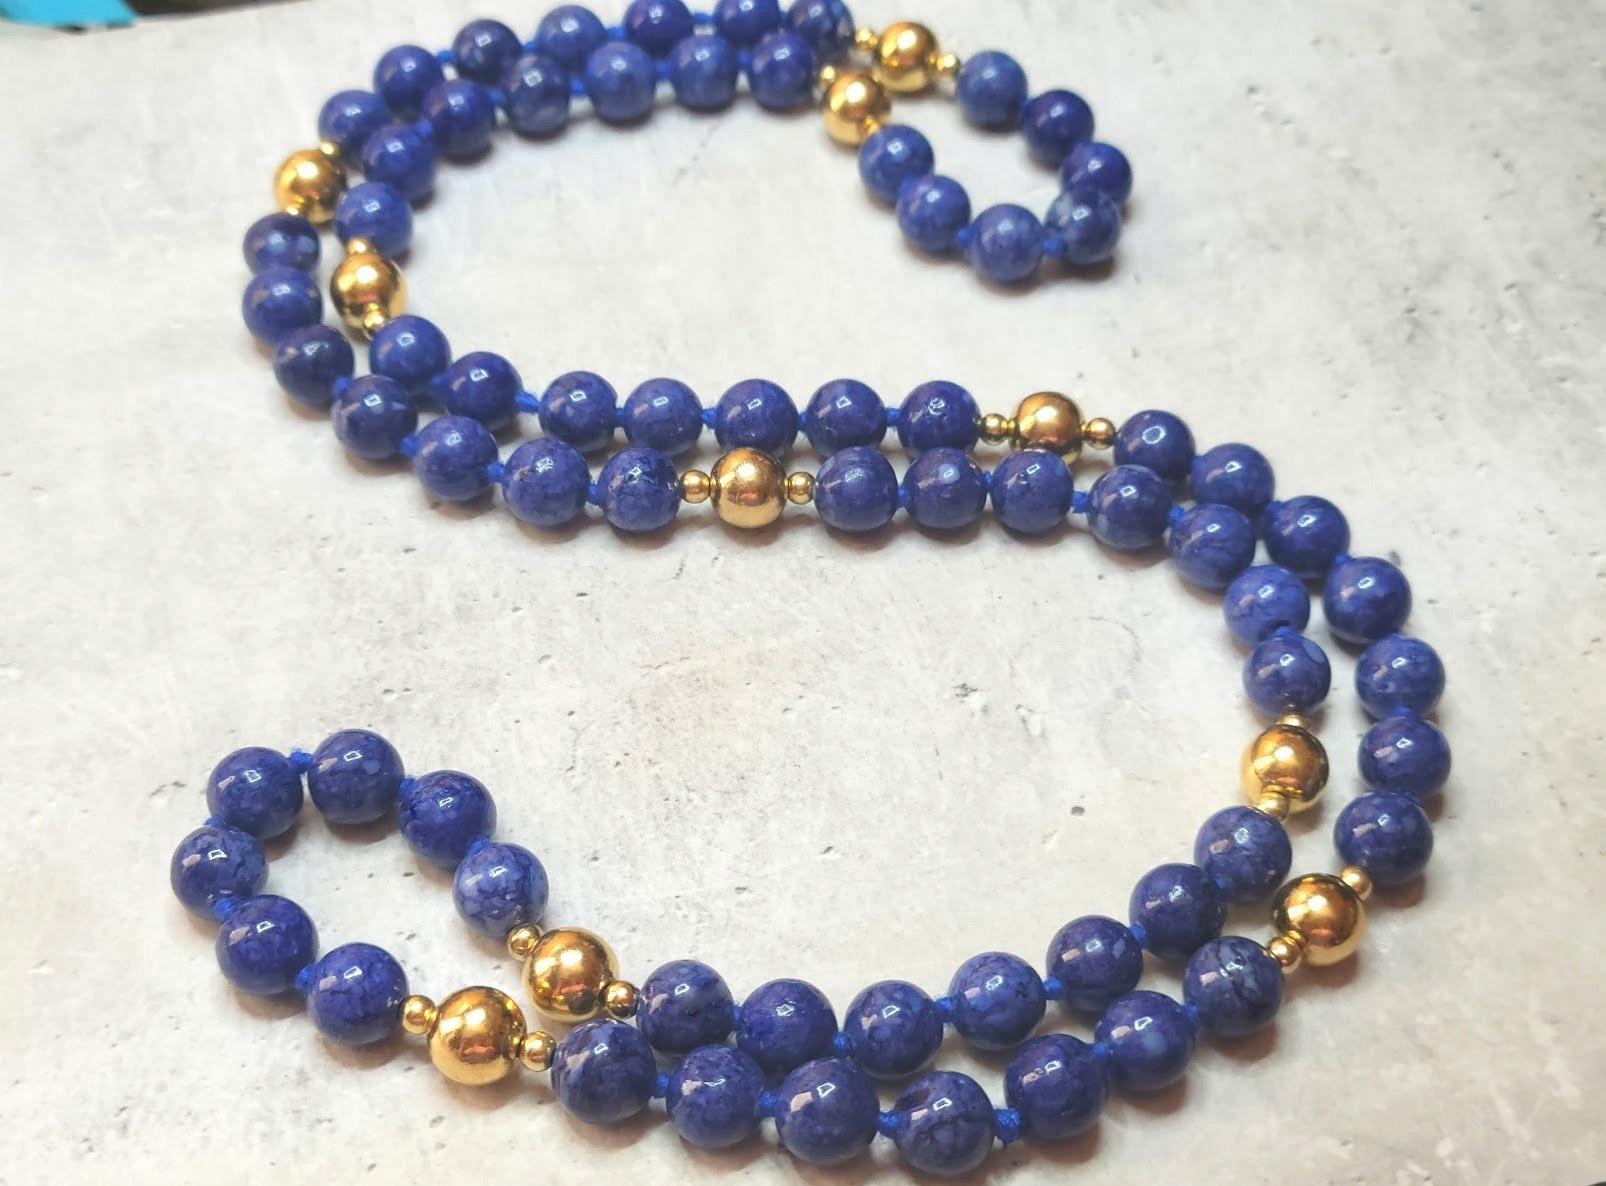 The length of the necklace is 30 inches (76 cm).
The size of the smooth round sodalite beads is 8 mm, the size of the large 14K gold beads is 7.7 mm, and the small 14K gold beads are 3mm.
The beads are not a transparent, intense blue with a soft